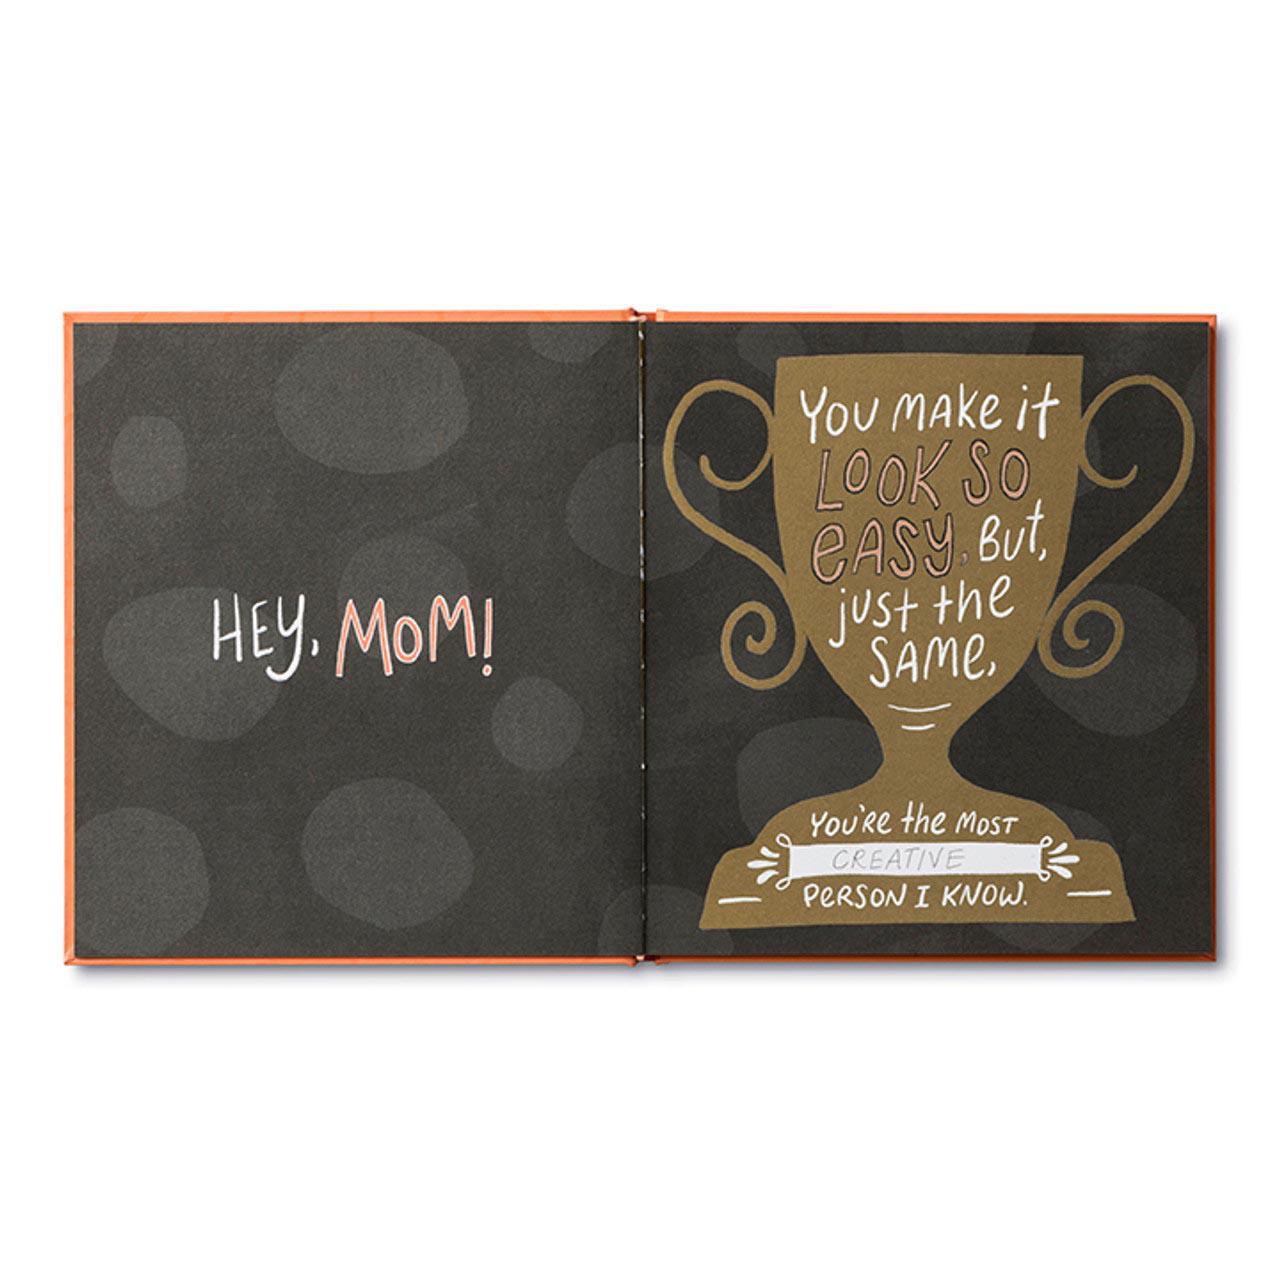 Mom, I Wrote a Book About You: The Ultimate Tribute for your Mom